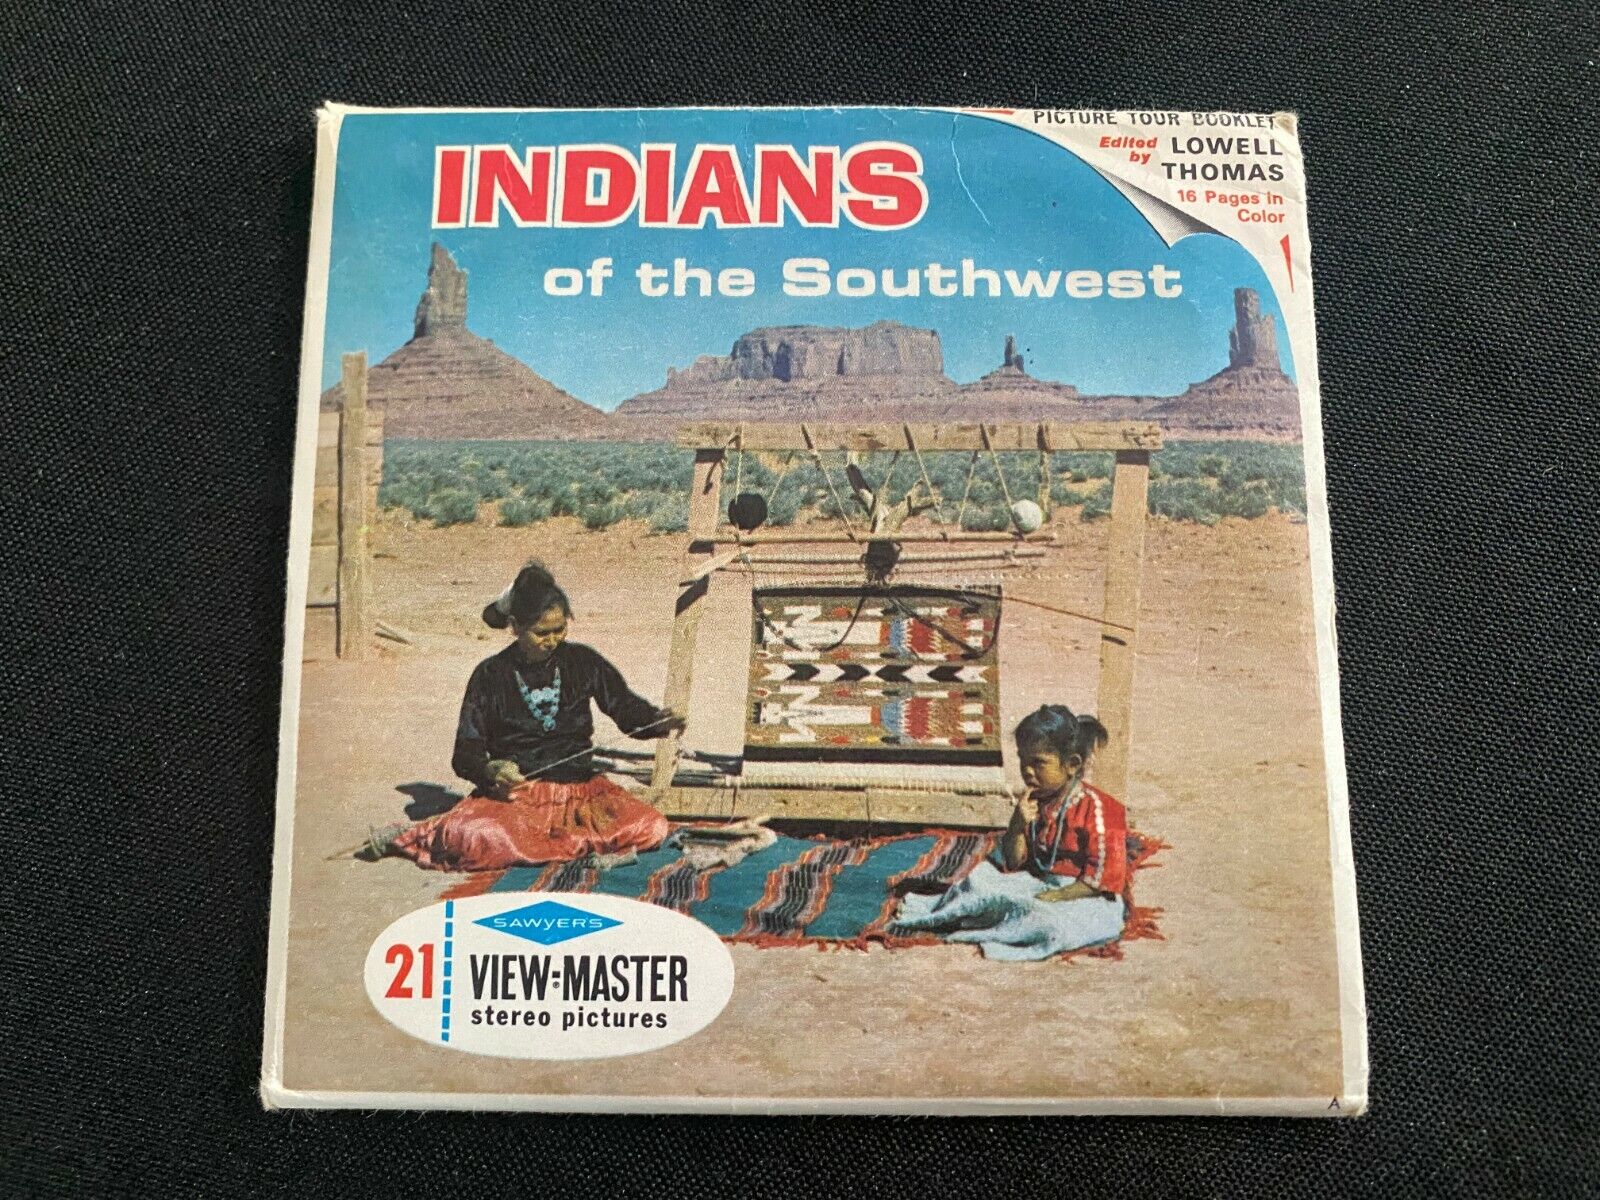 Sawyer\'s View-Master #B721 INDIANS OF THE SOUTHWEST Circa 1962 Pressing